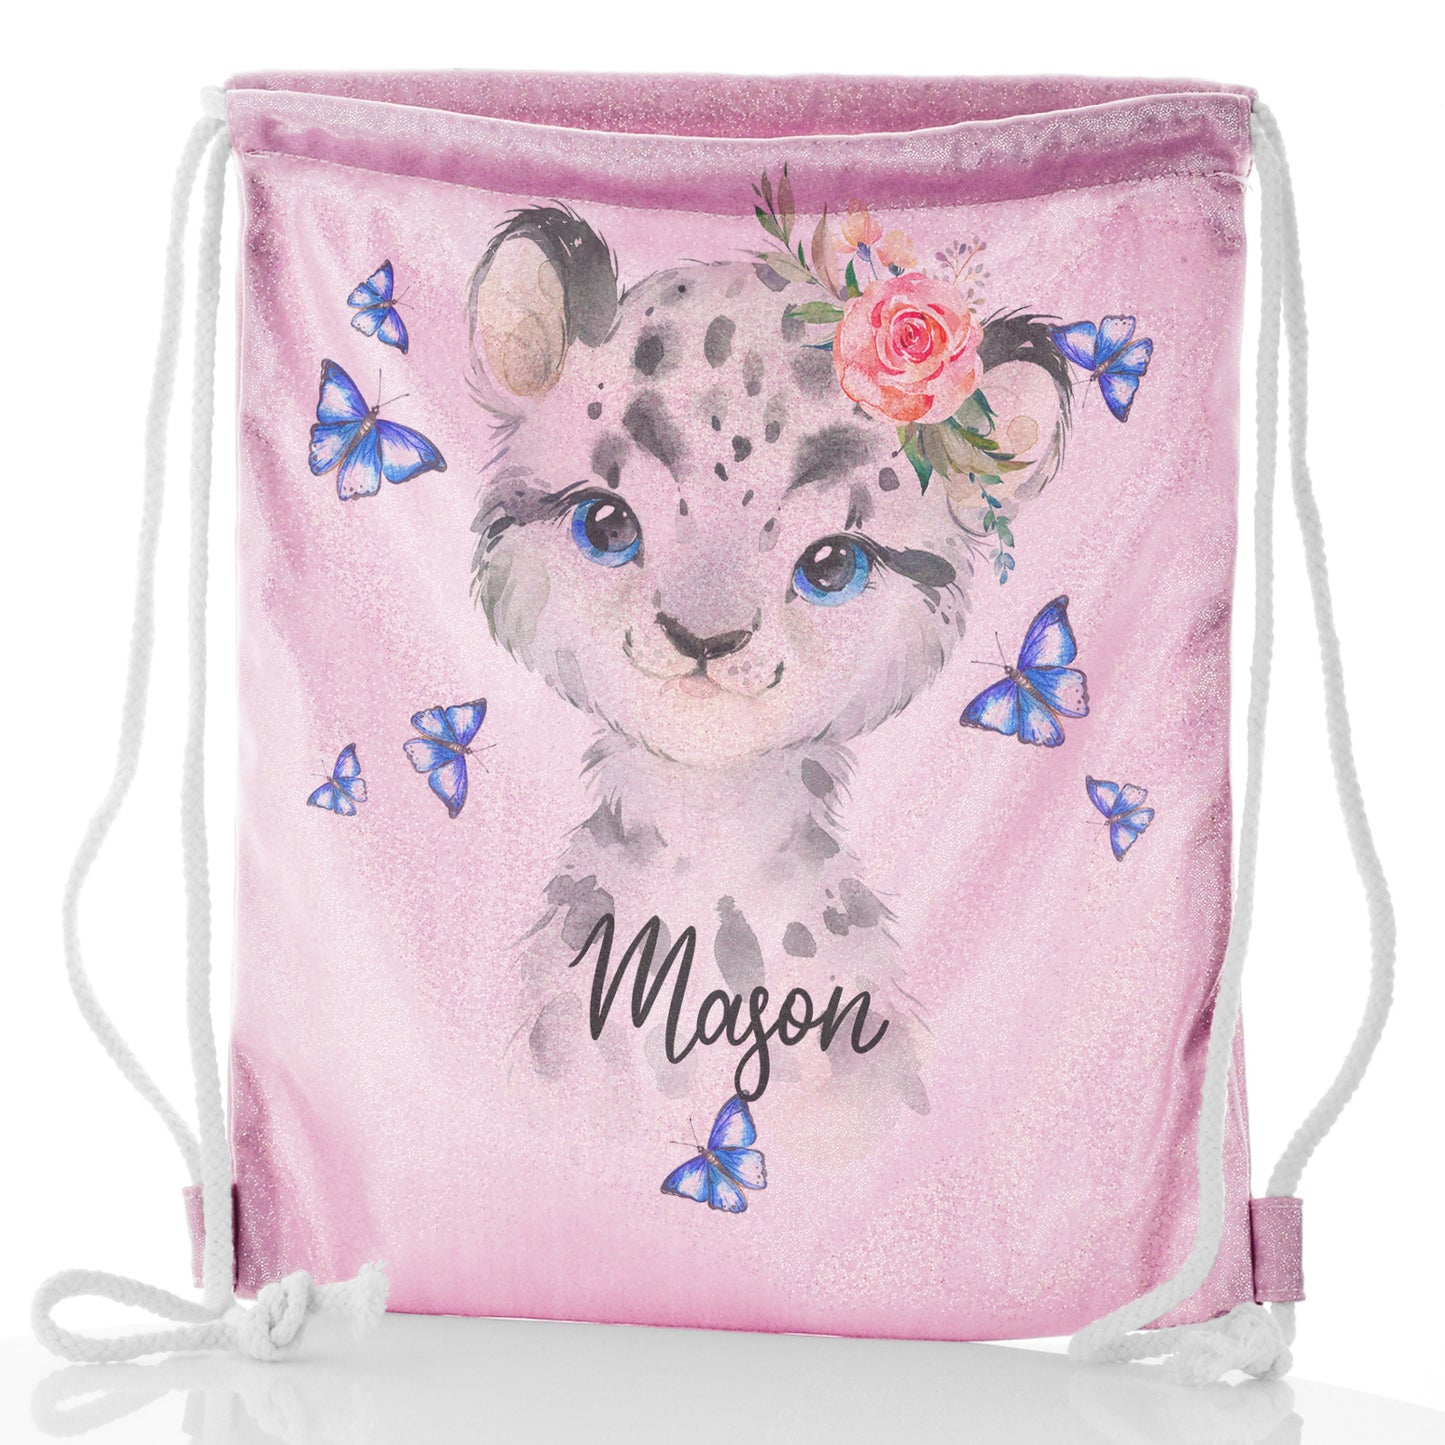 Personalised Glitter Drawstring Backpack with Snow Leopard Blue Butterflies and Cute Text